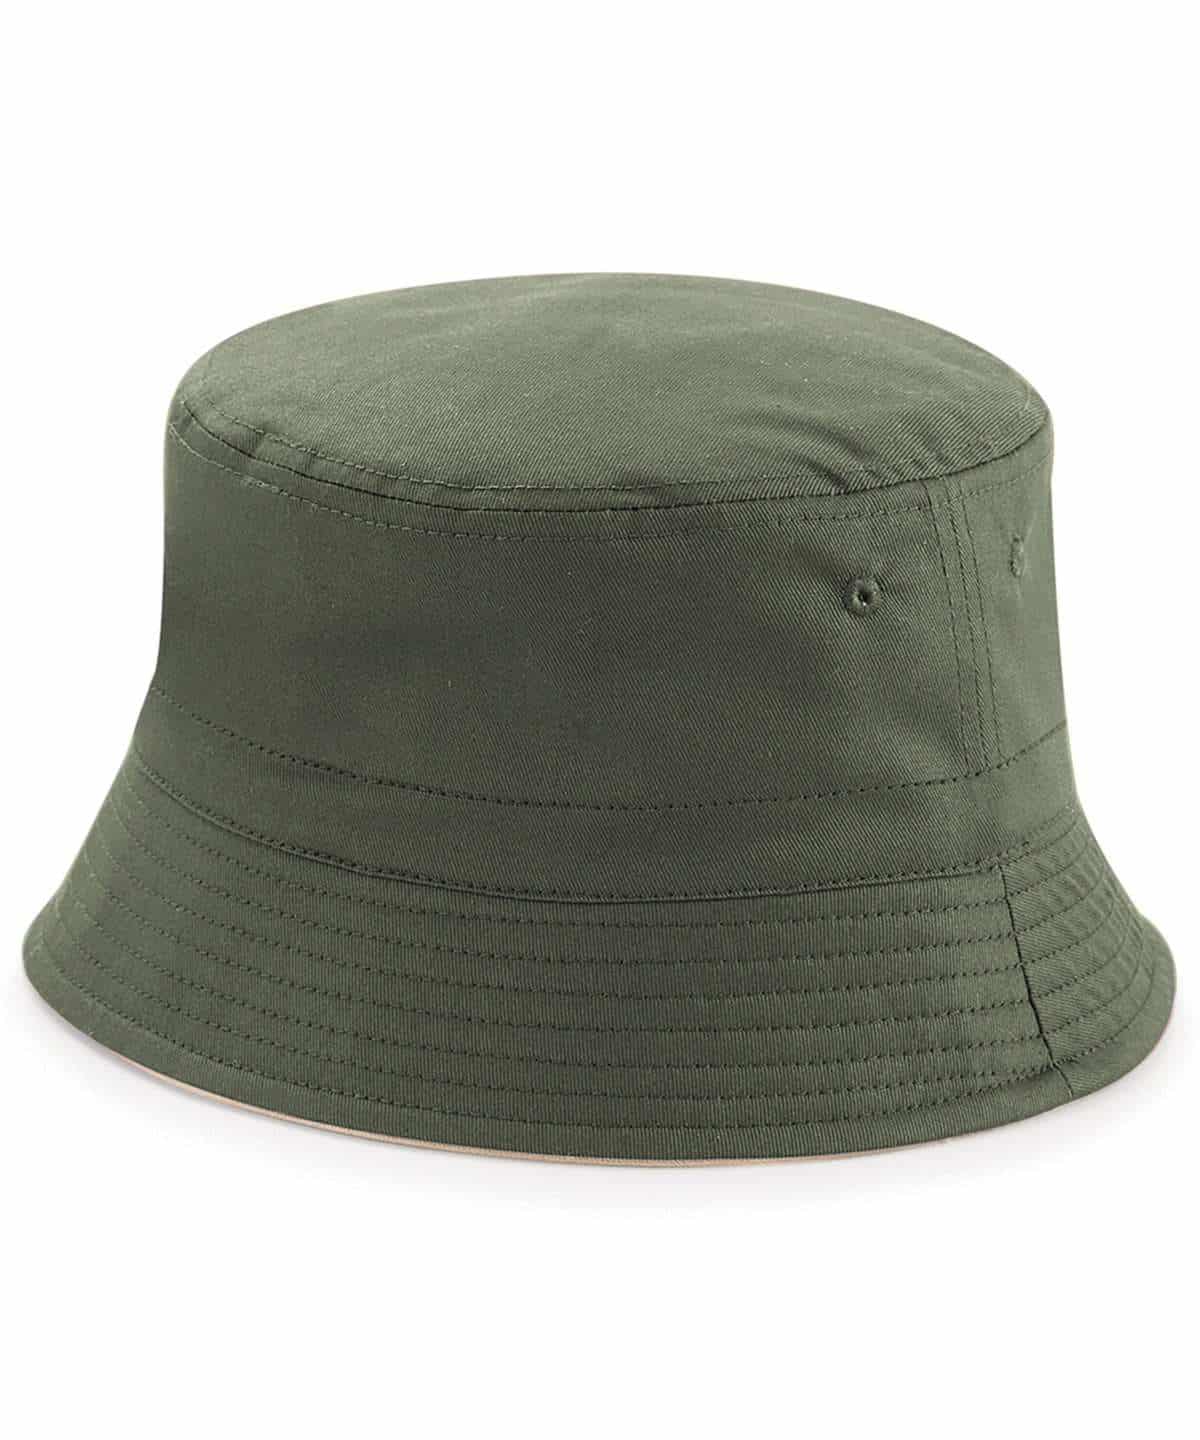 BC686 OliveGreen Stone FT Bucket Hat with Pheasant embroidery logo. Available in French Navy / White underside, Olive Green / Stone underside & Black / Light Grey Underside 100% Cotton Twill Short brim. Stitched ventilation eyelets. BSCI certified. Reach certified.